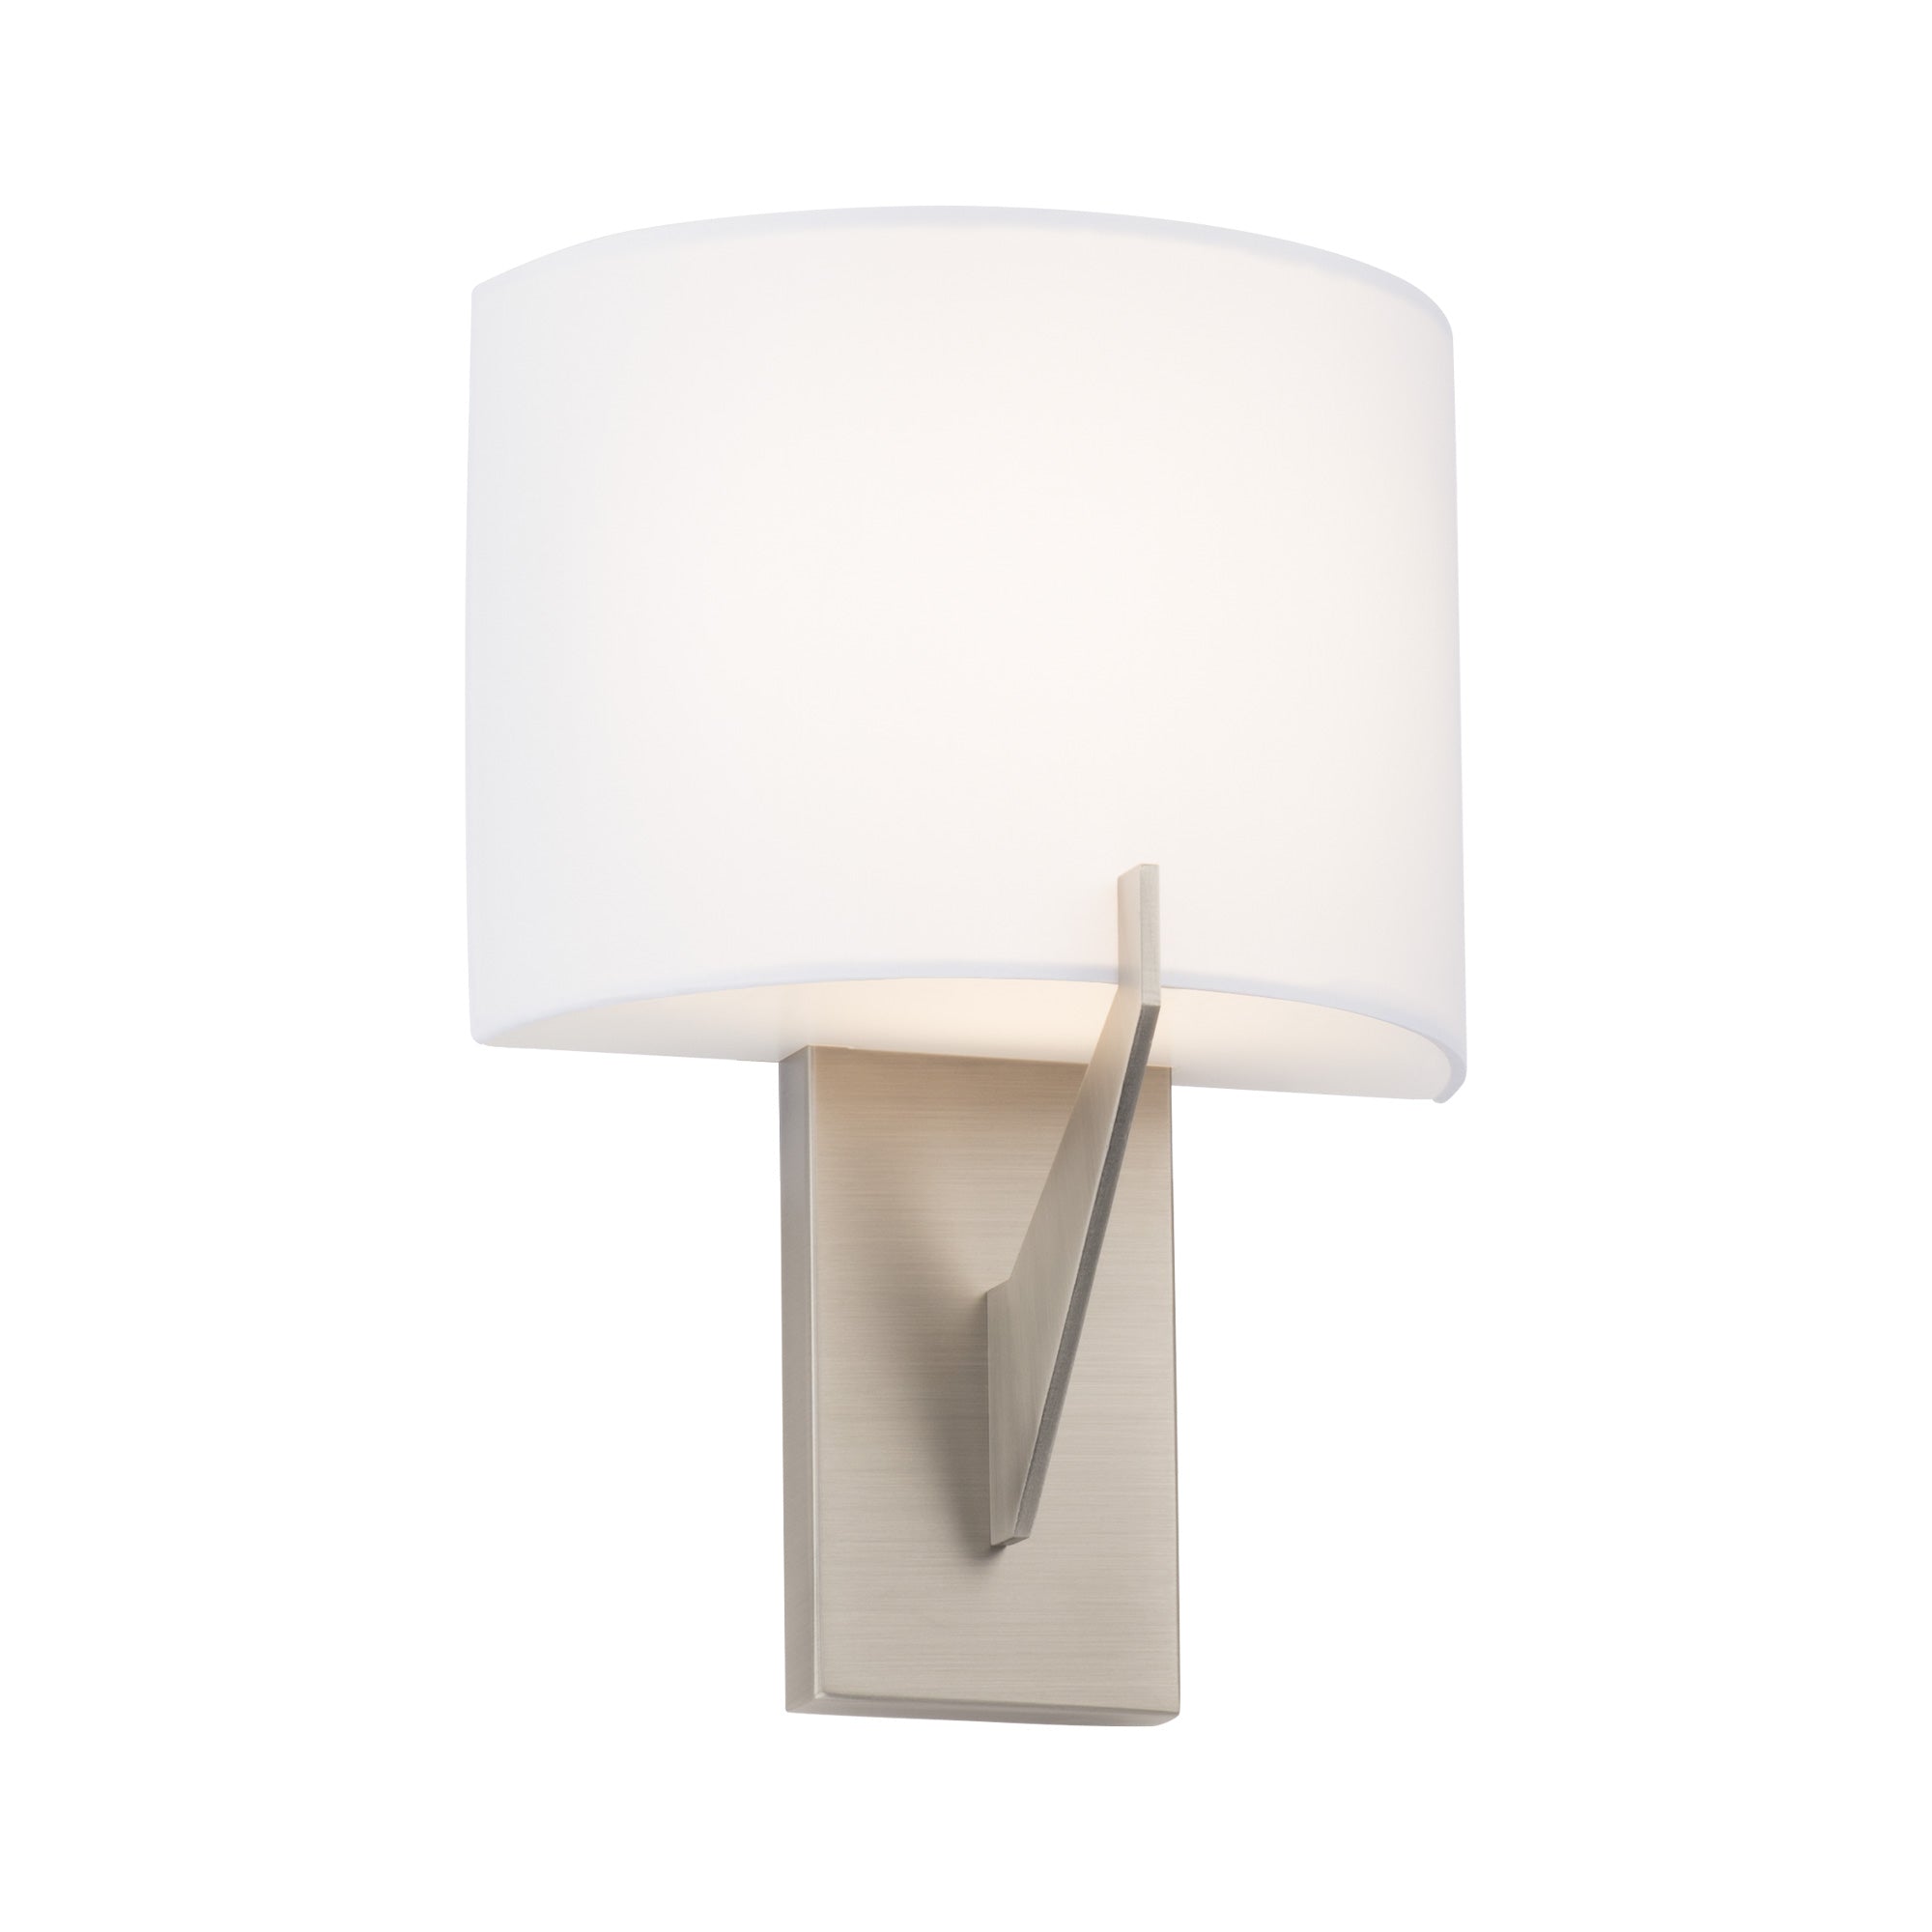 Fitzgerald 11" LED Wall Sconce